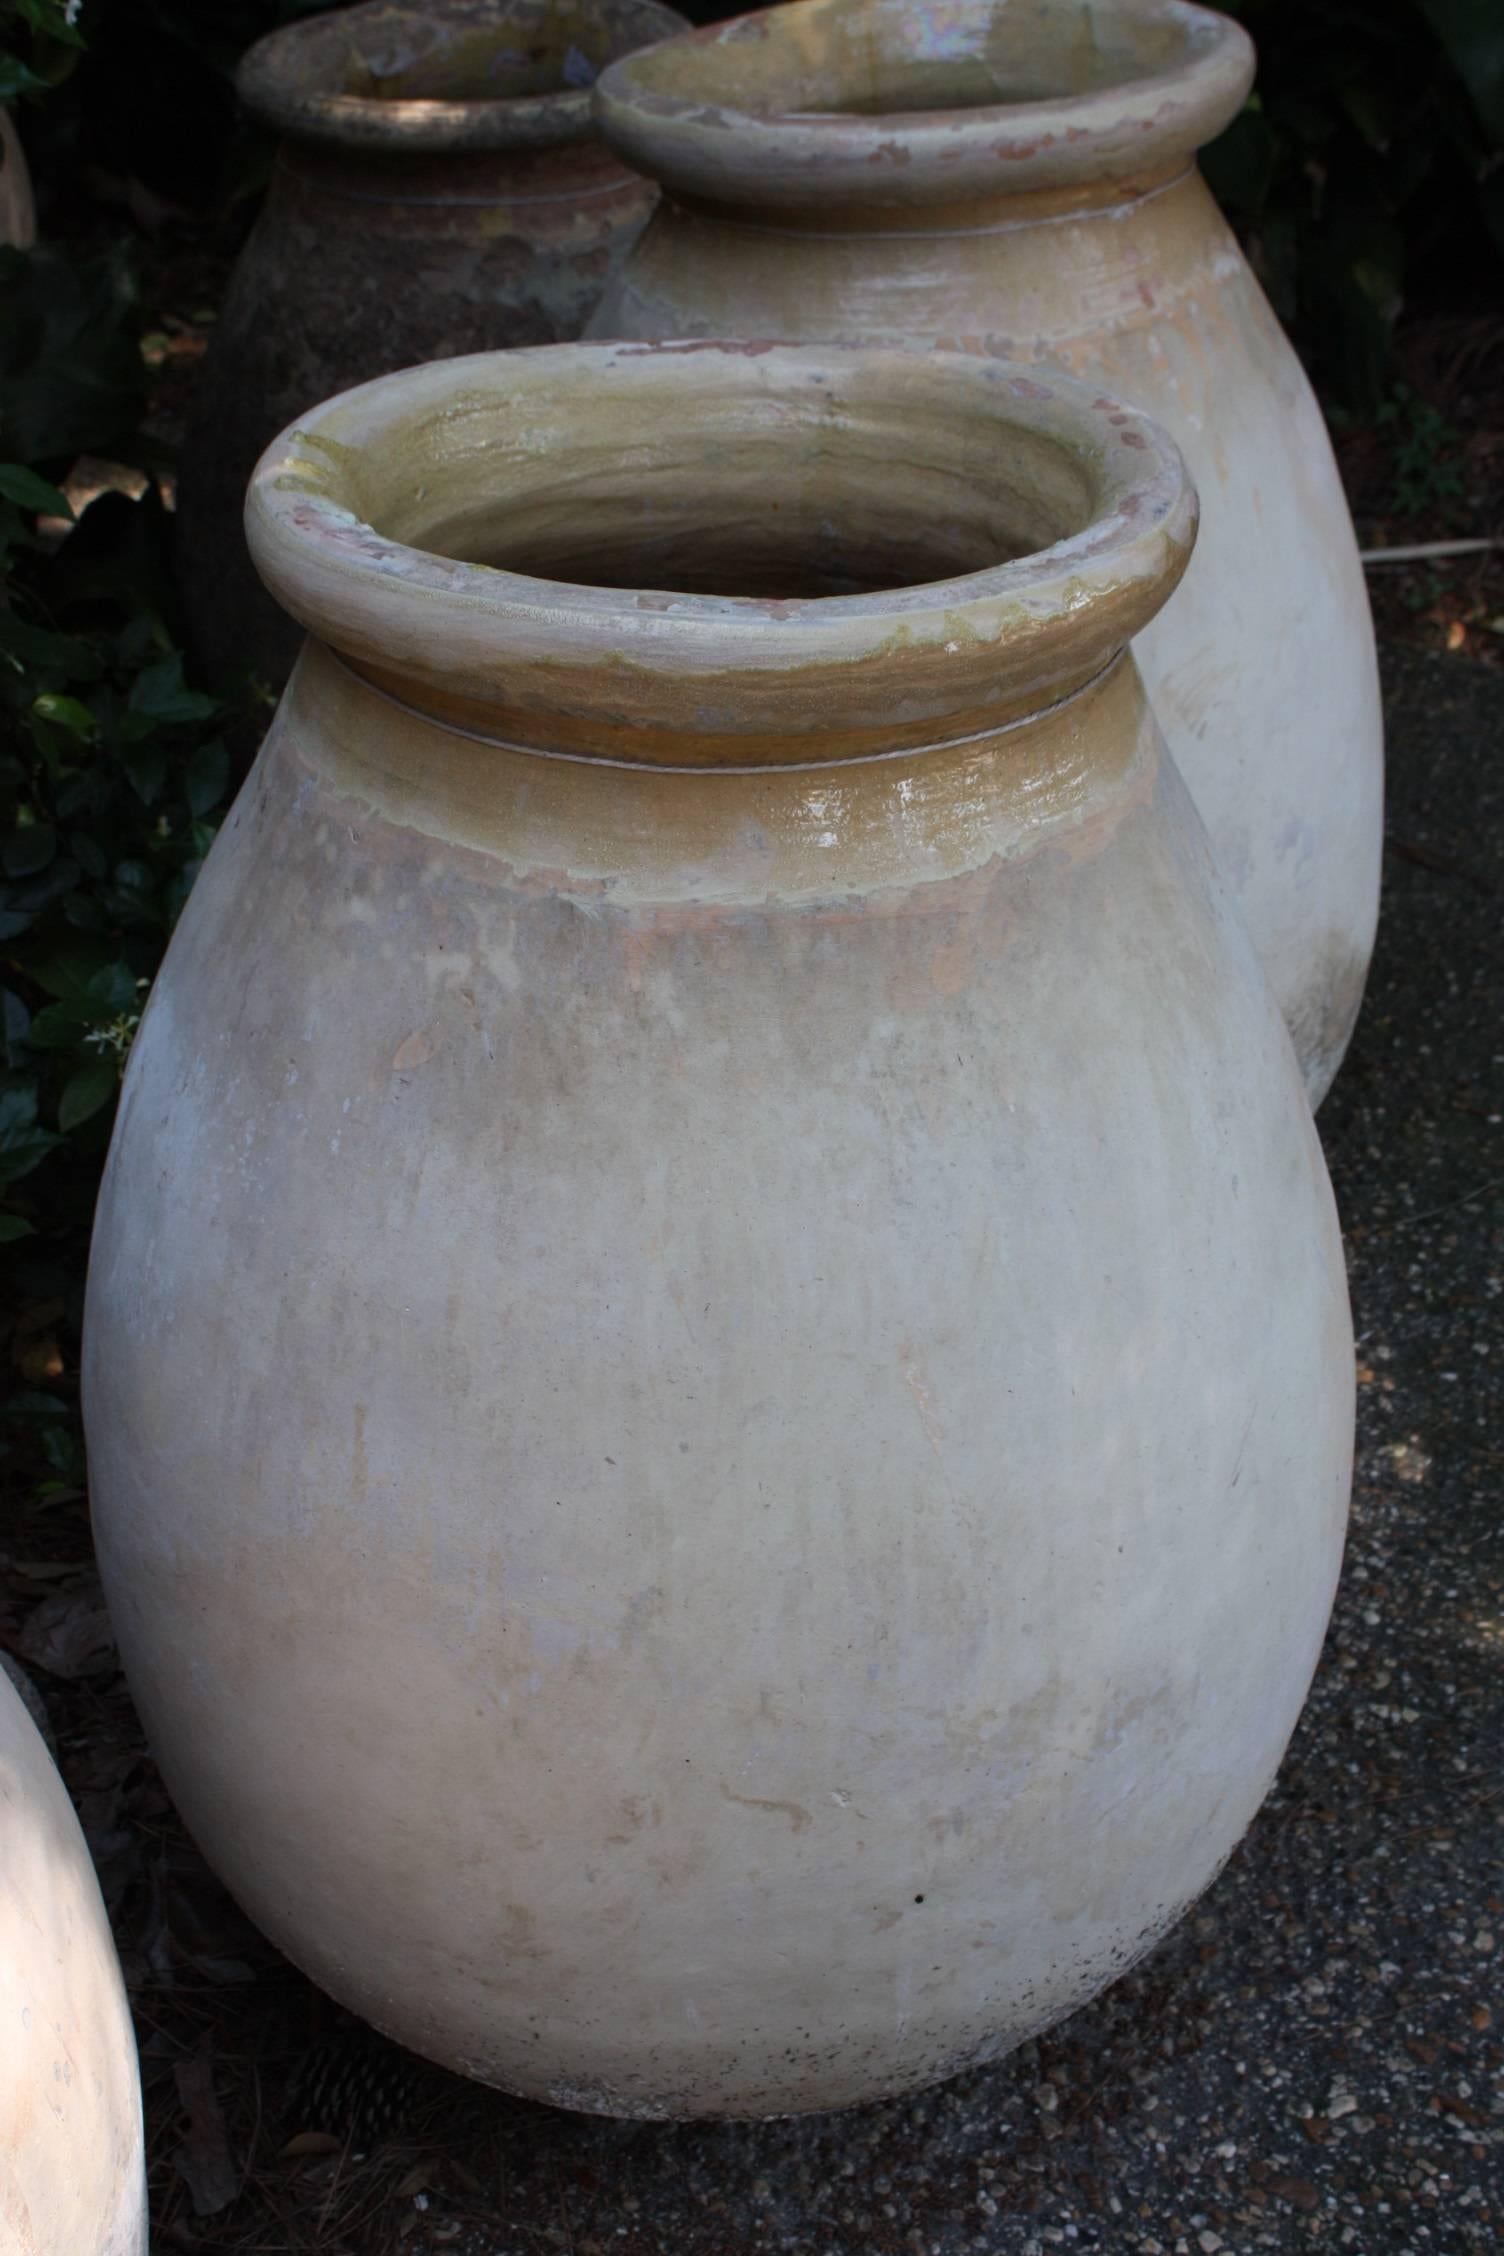 Early 19th century French terracotta Biot olive jar with an attractive shape, patina and yellow glazing.